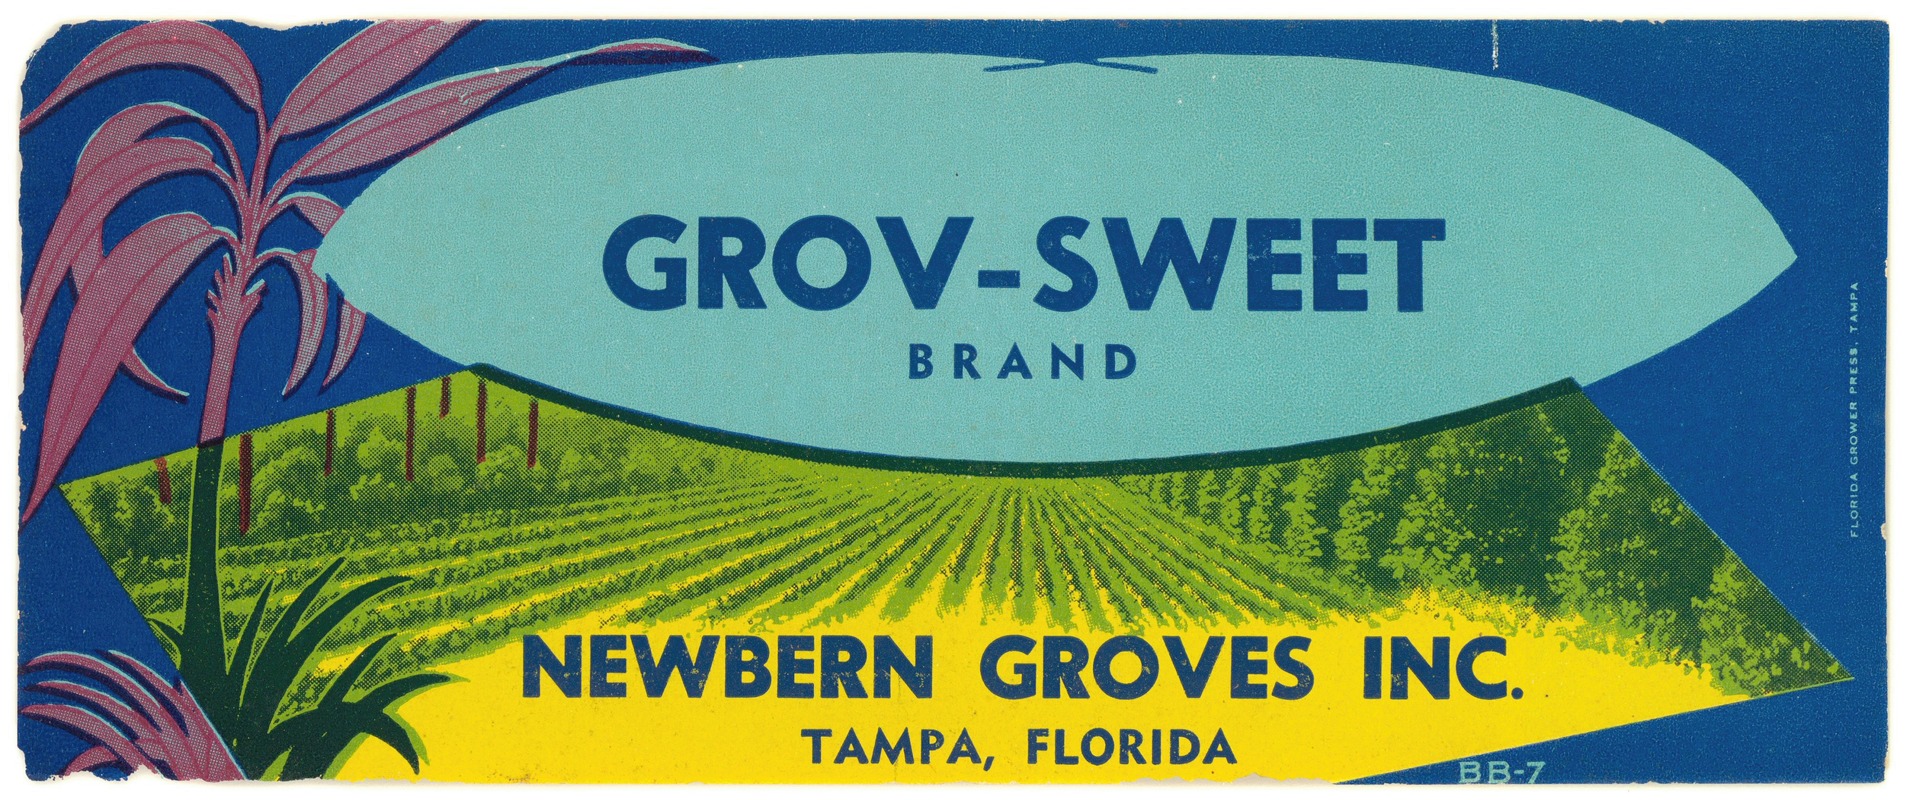 Anonymous - Grov-Sweet Brand Produce Label